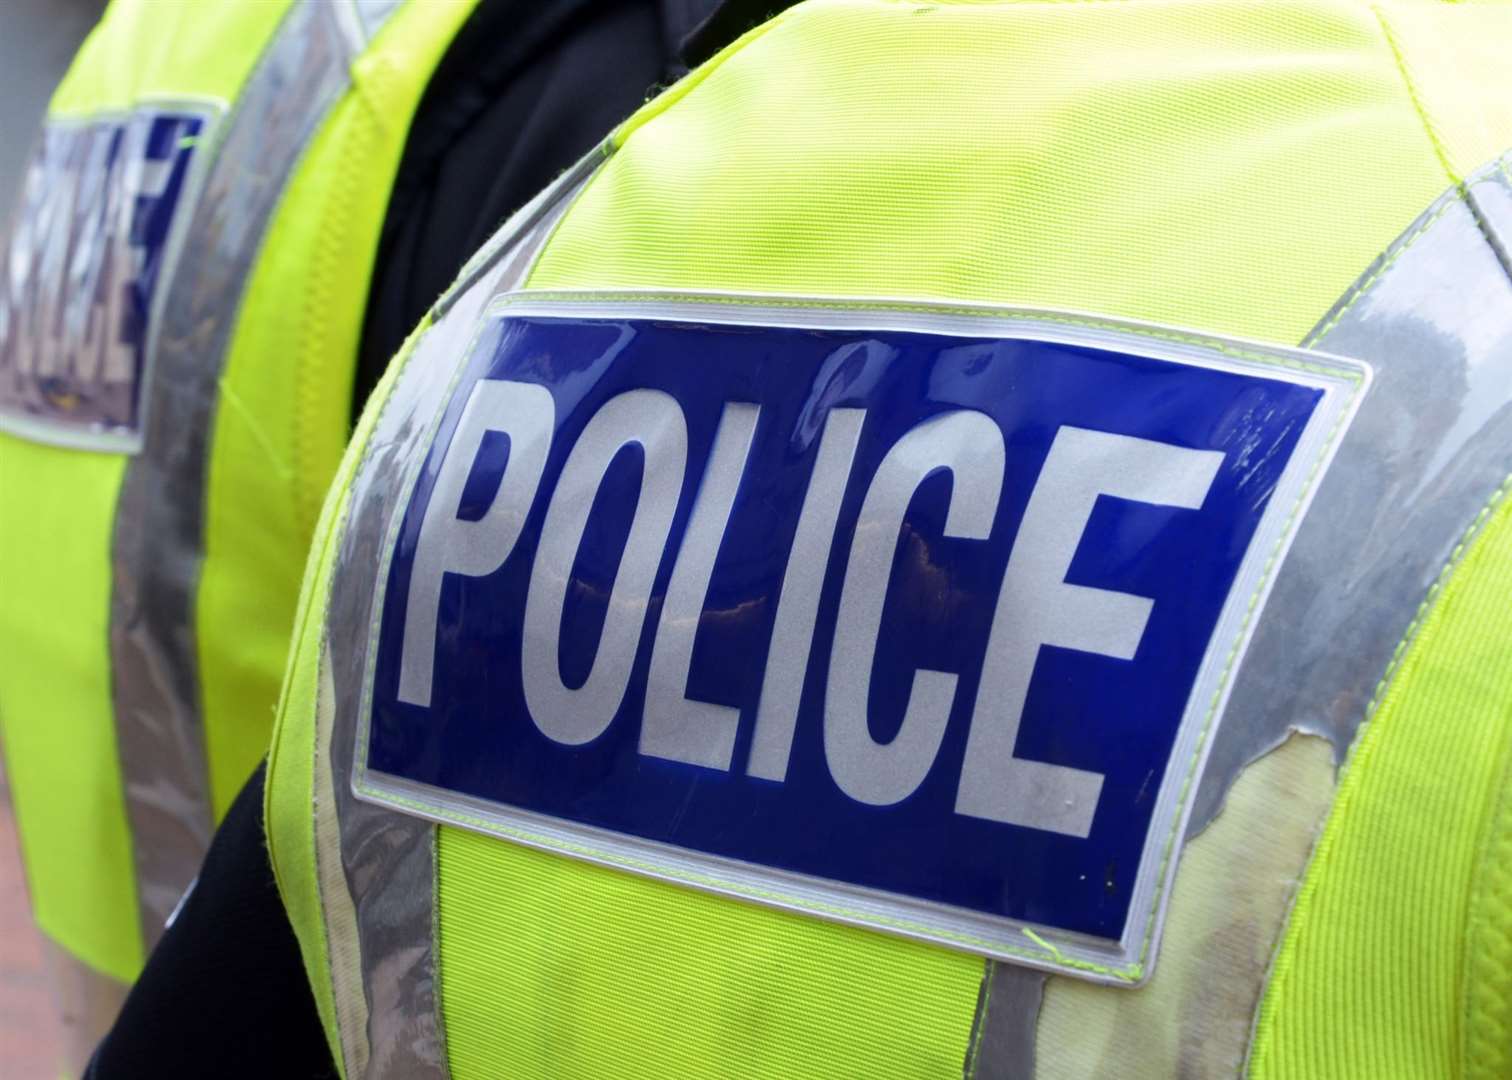 Police have appealed for information following a theft in Fraserburgh.